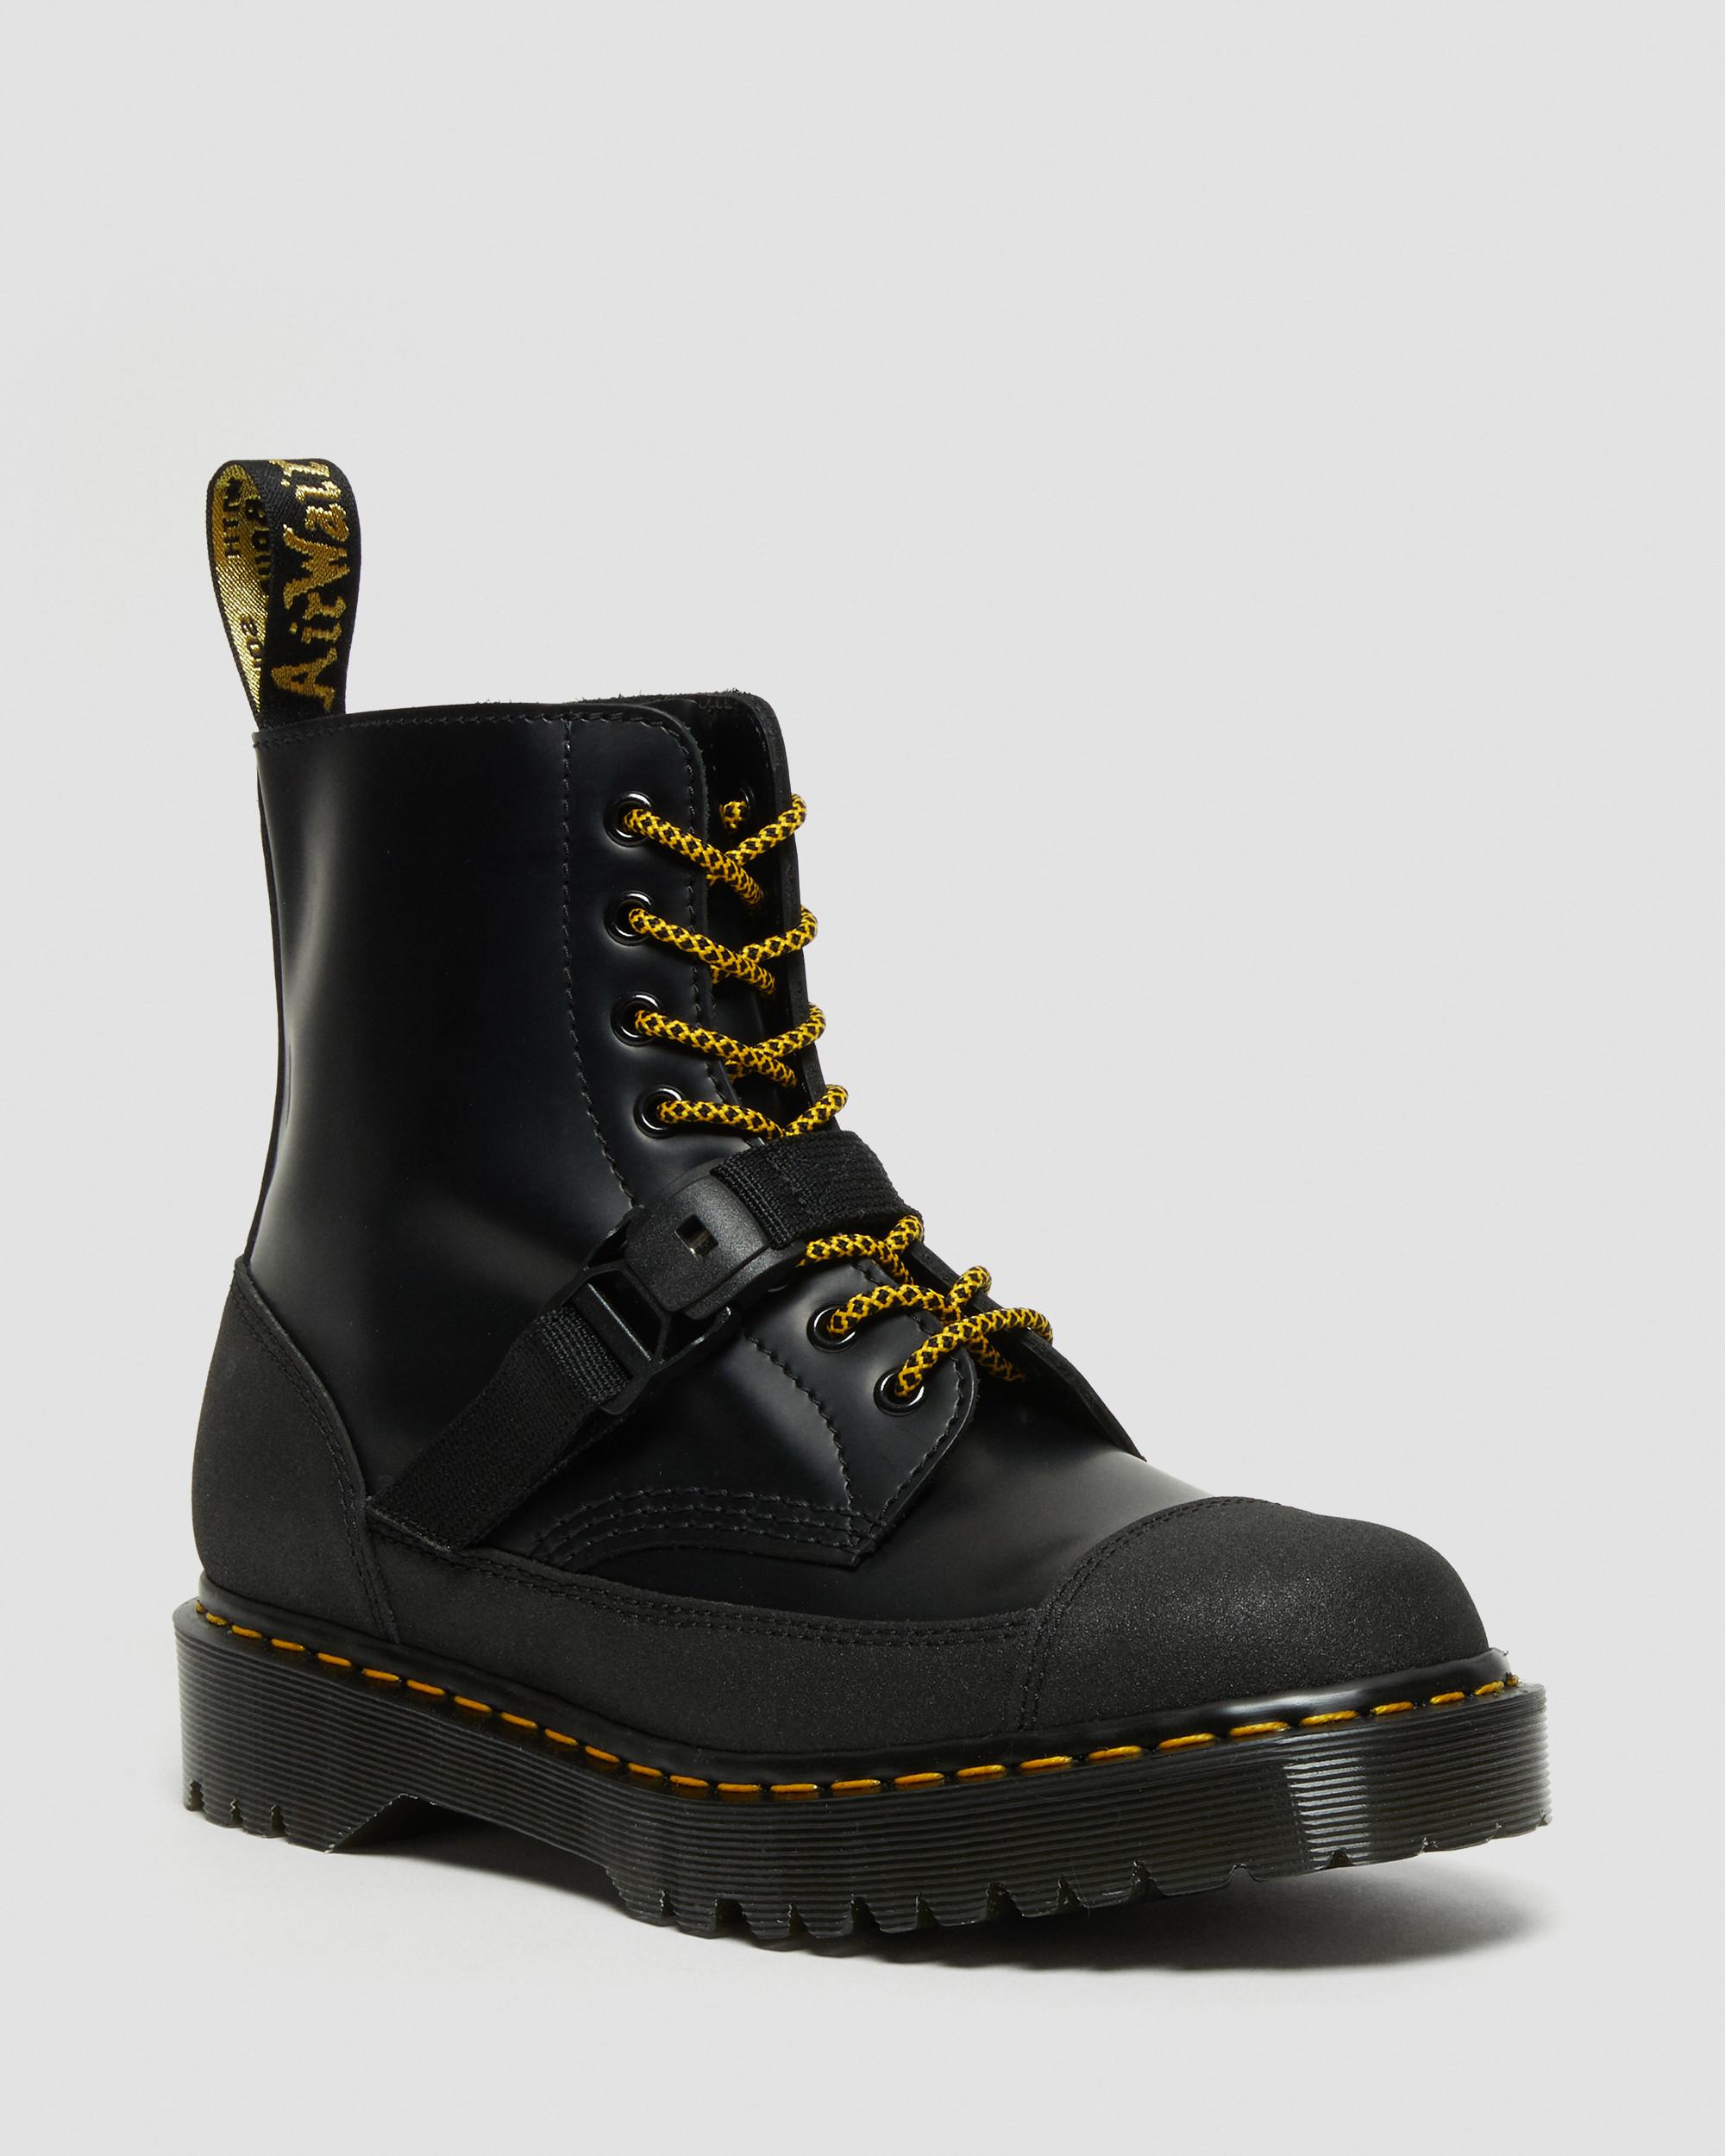 1460 Bex Tech Made in England Leather Lace Up Boots in Black | Dr. Martens